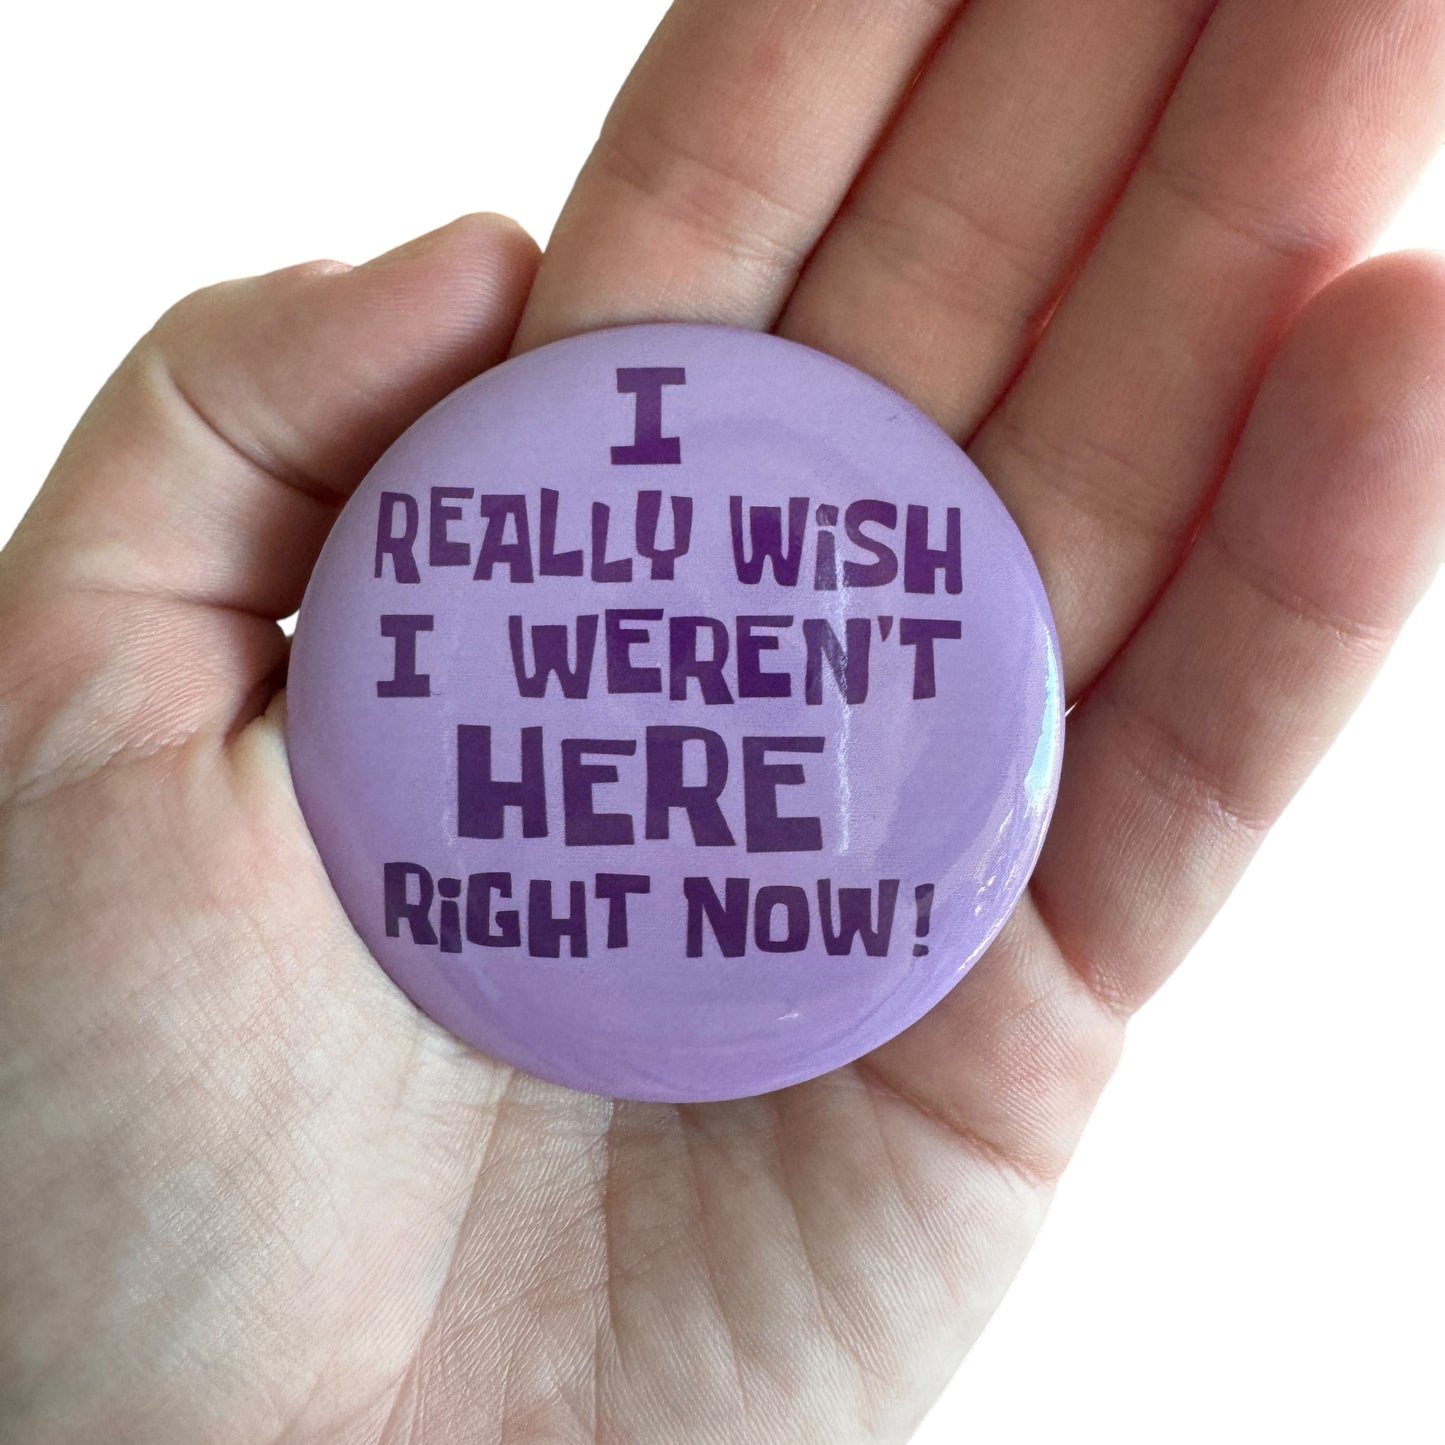 Pin — ‘I really wish I weren’t here right now.’